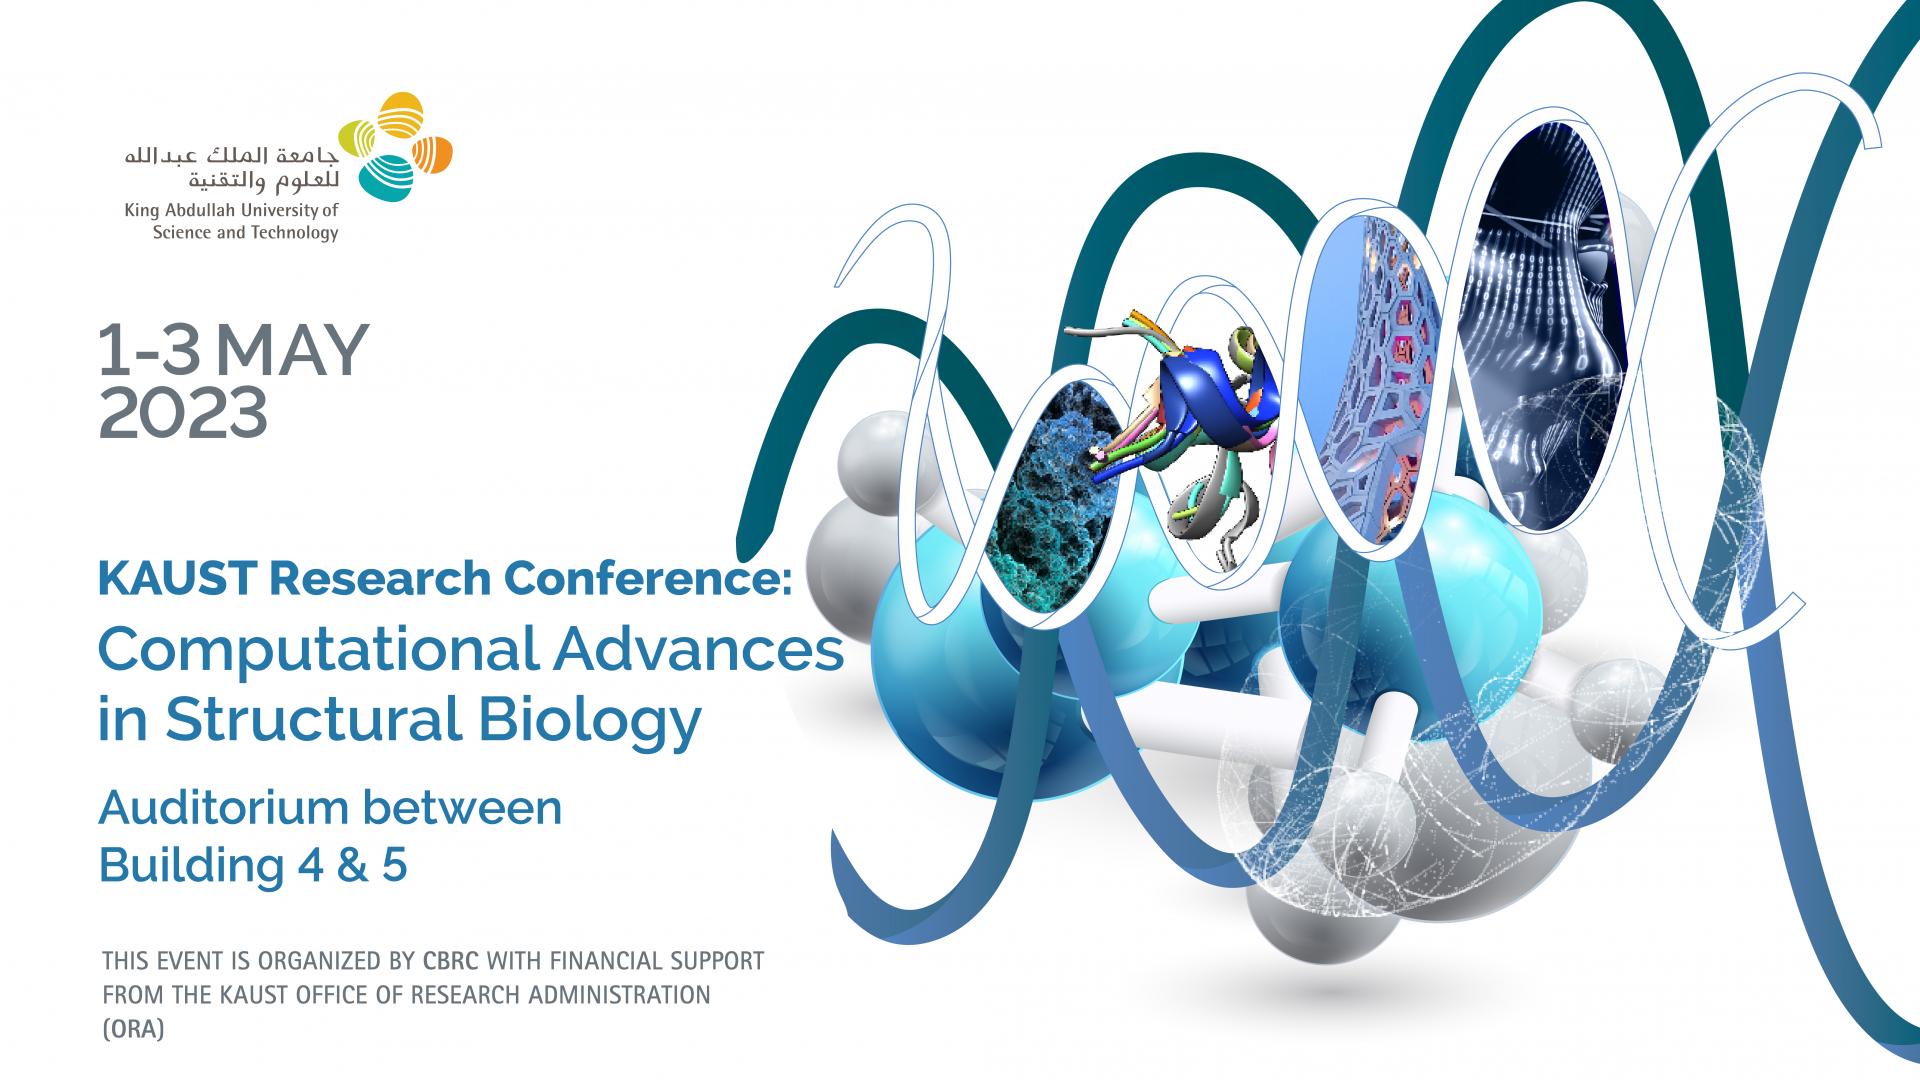 KAUST Research Conference 2023 on Computational Advances in Structural